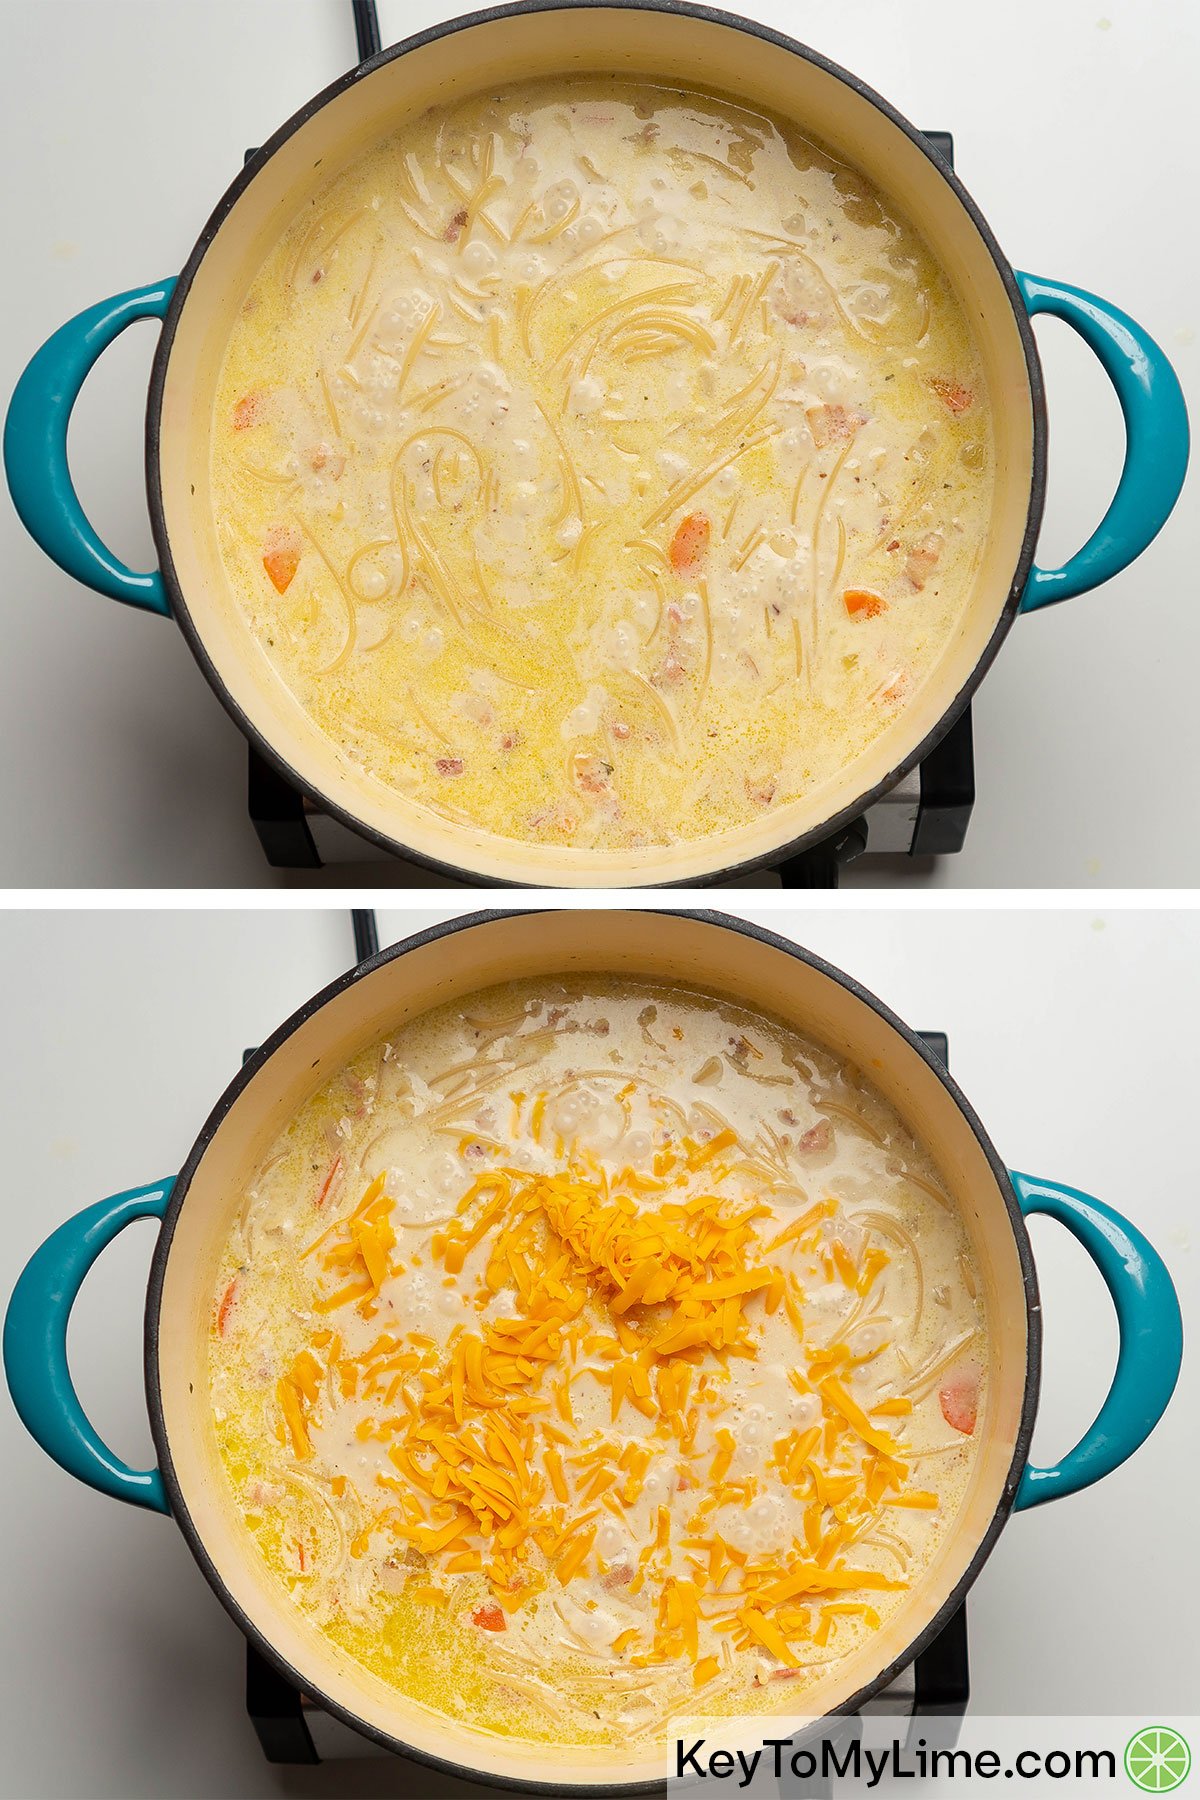 Mixing cheddar cheese into chicken soup.